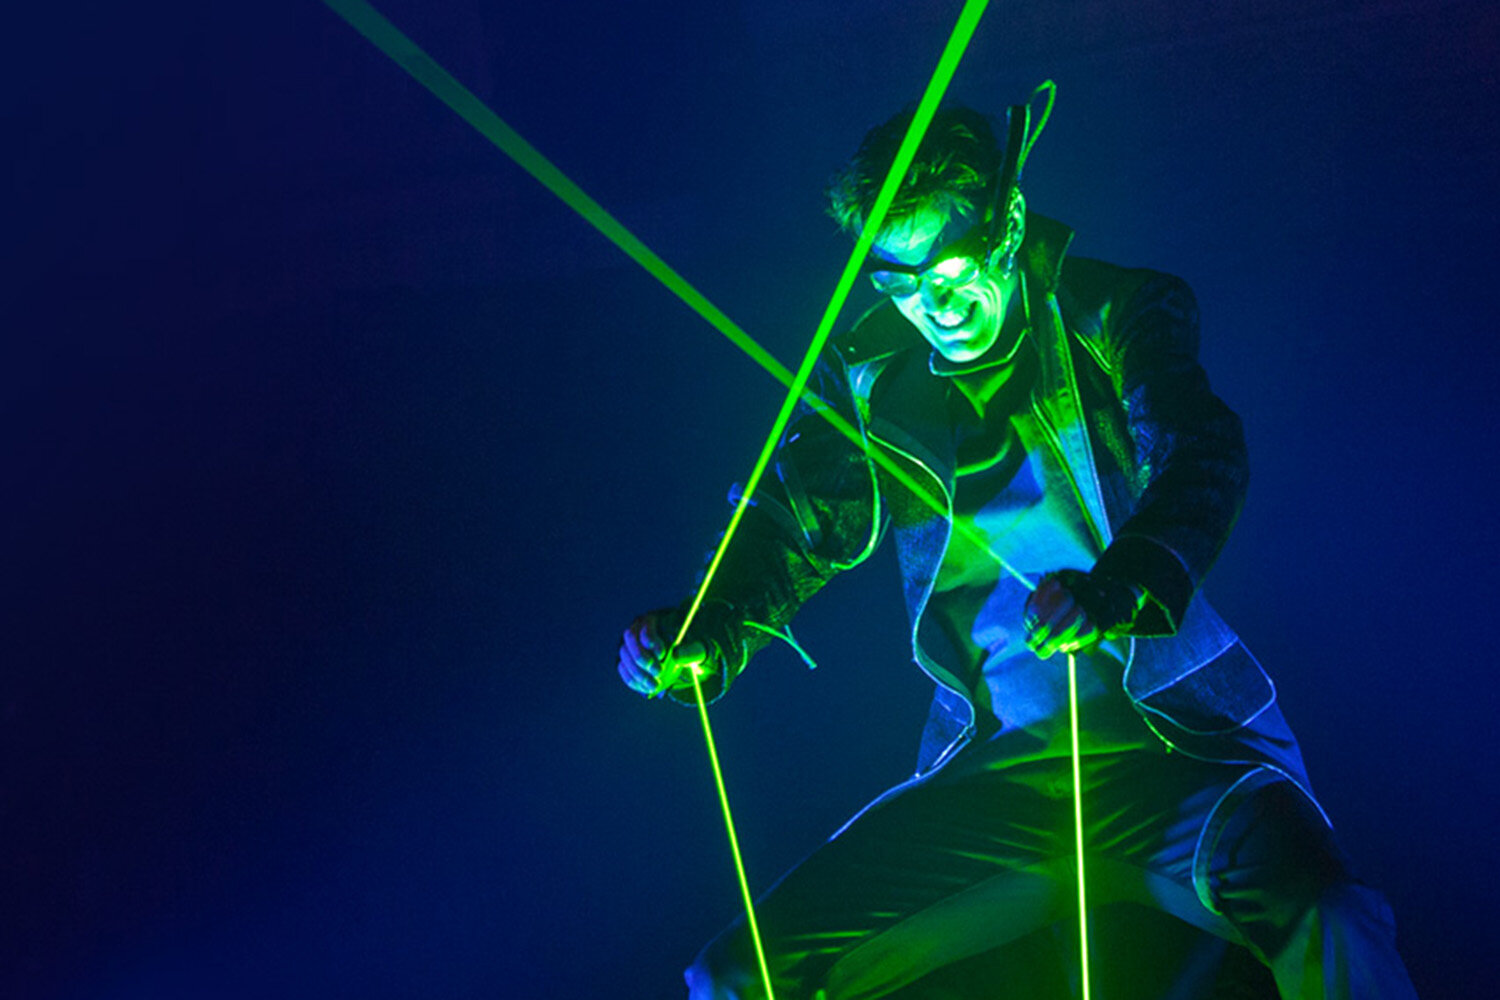 This electrifying group of circus performers integrate new technology in their awe-inspiring productions.